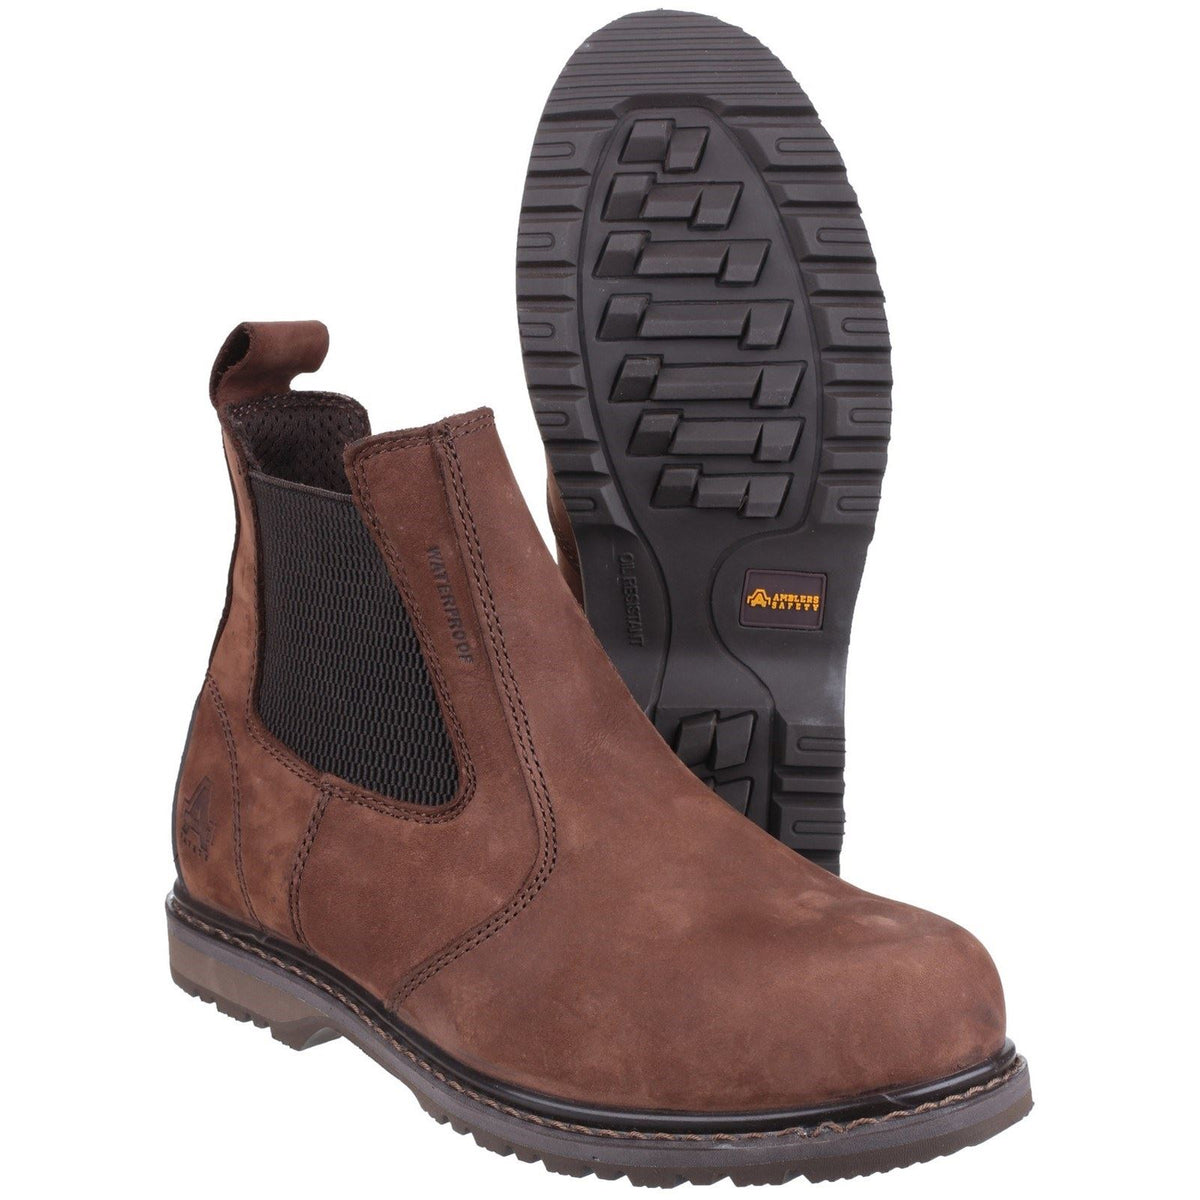 Amblers Safety AS148 Sperrin Lightweight Waterproof Pull On Dealer Safety Boots